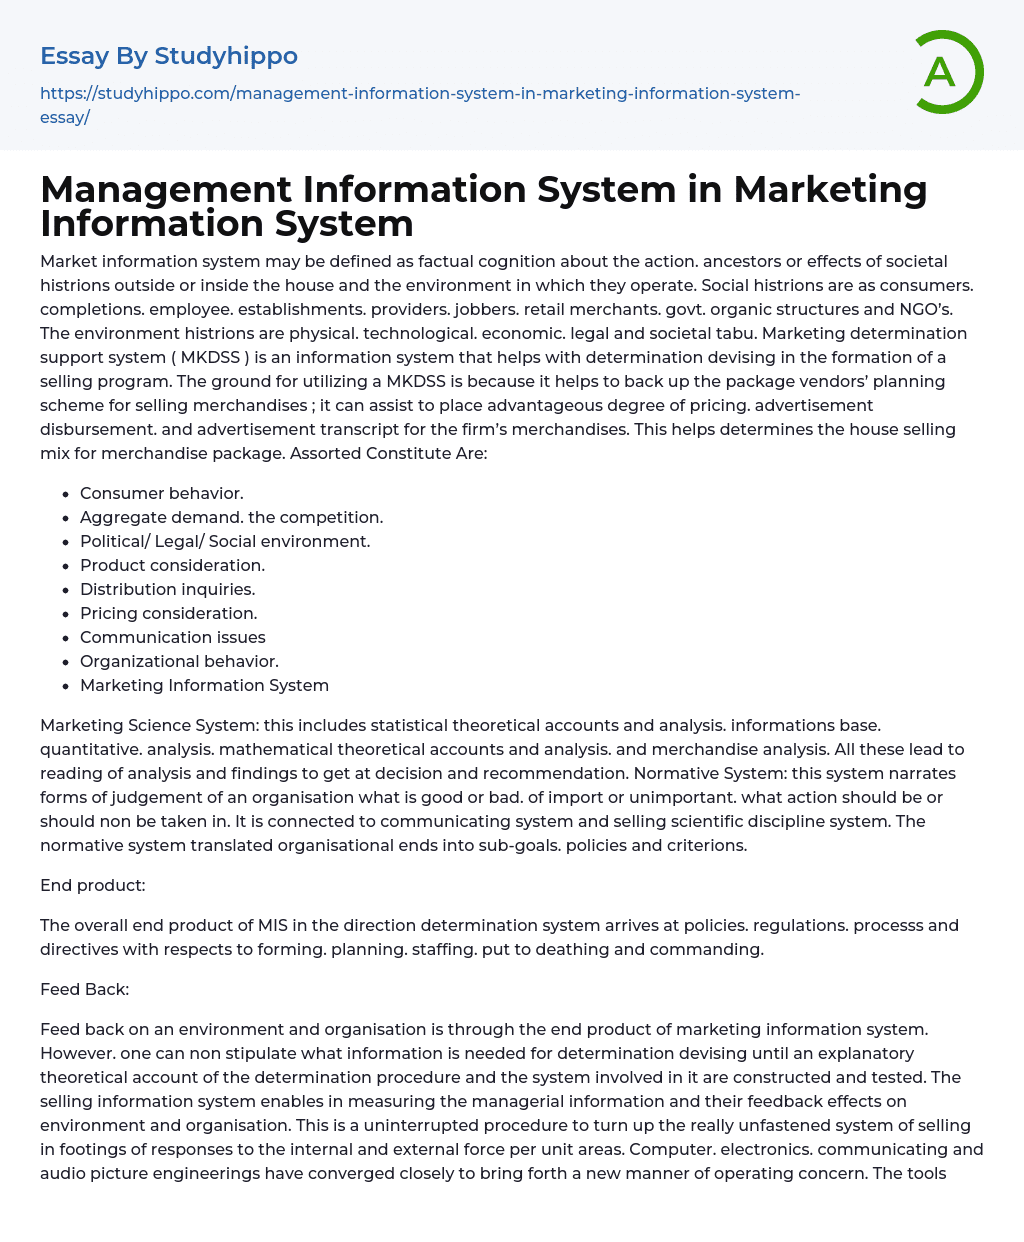 Management Information System in Marketing Information System Essay Example